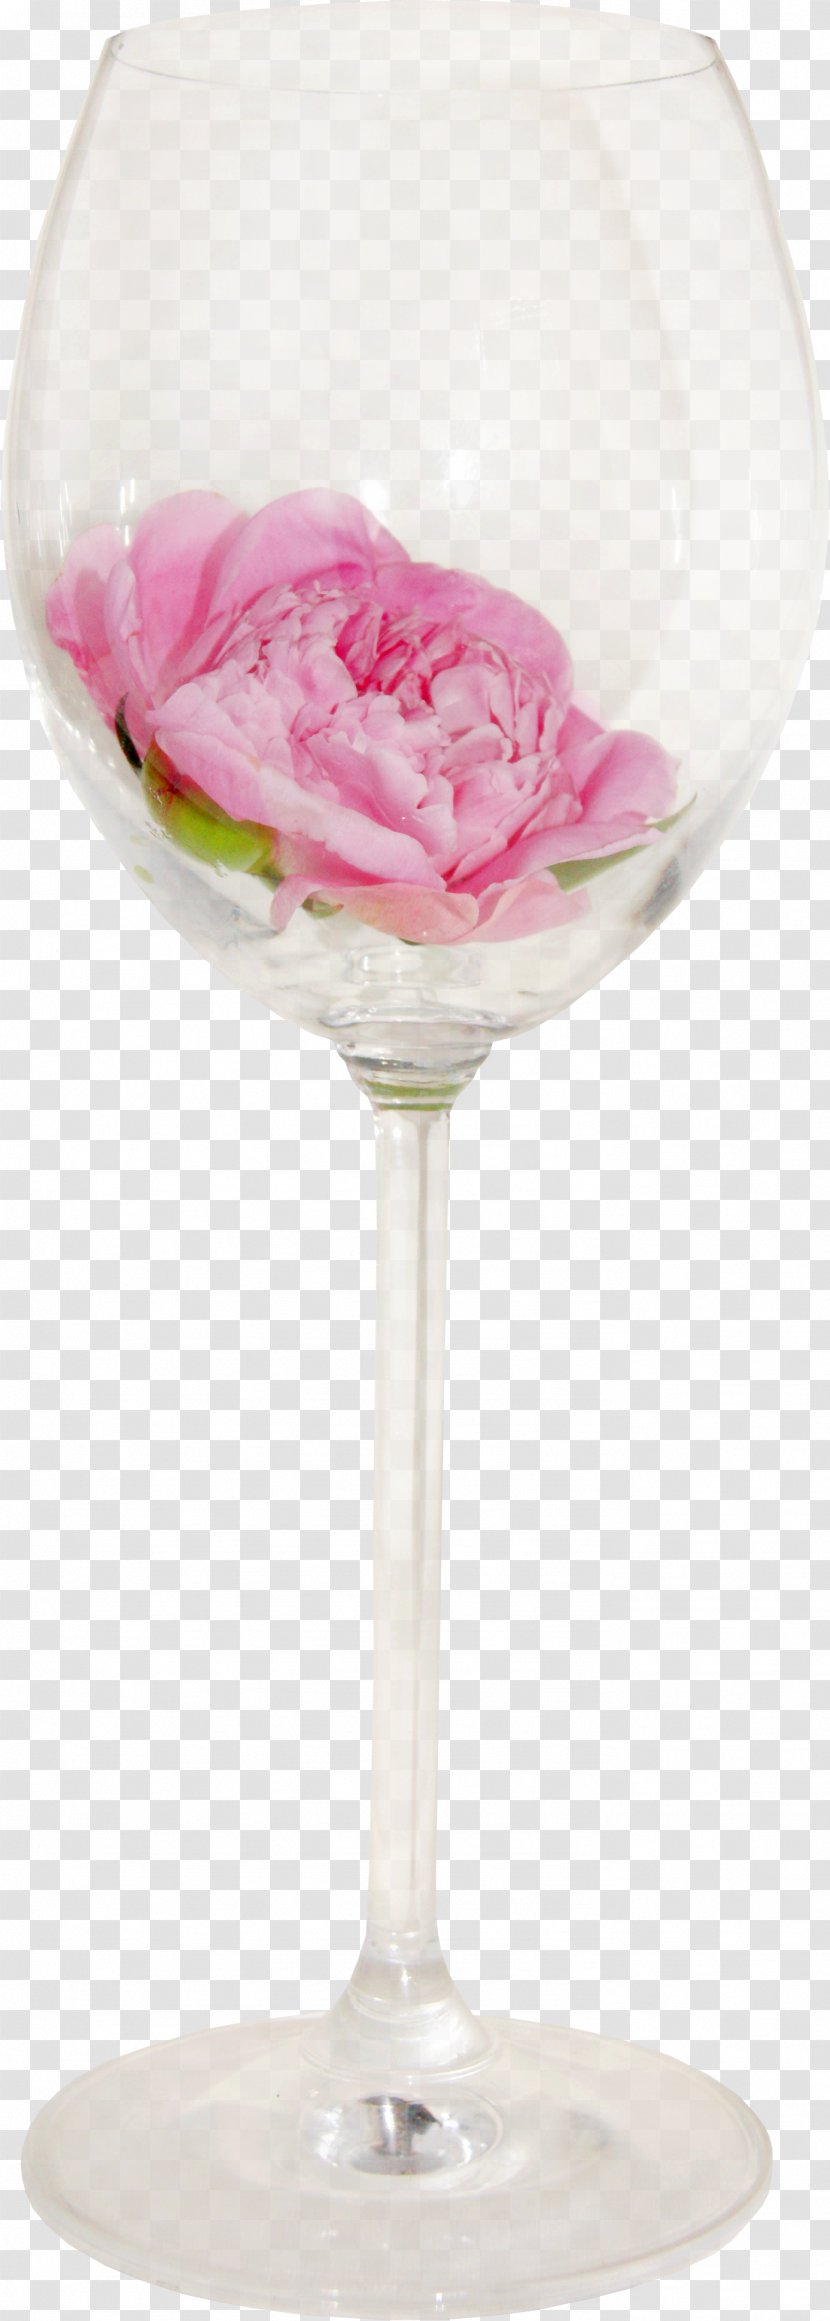 Pink Lady Martini Cocktail Glass Petal - Cup Red Wine Transparent PNG